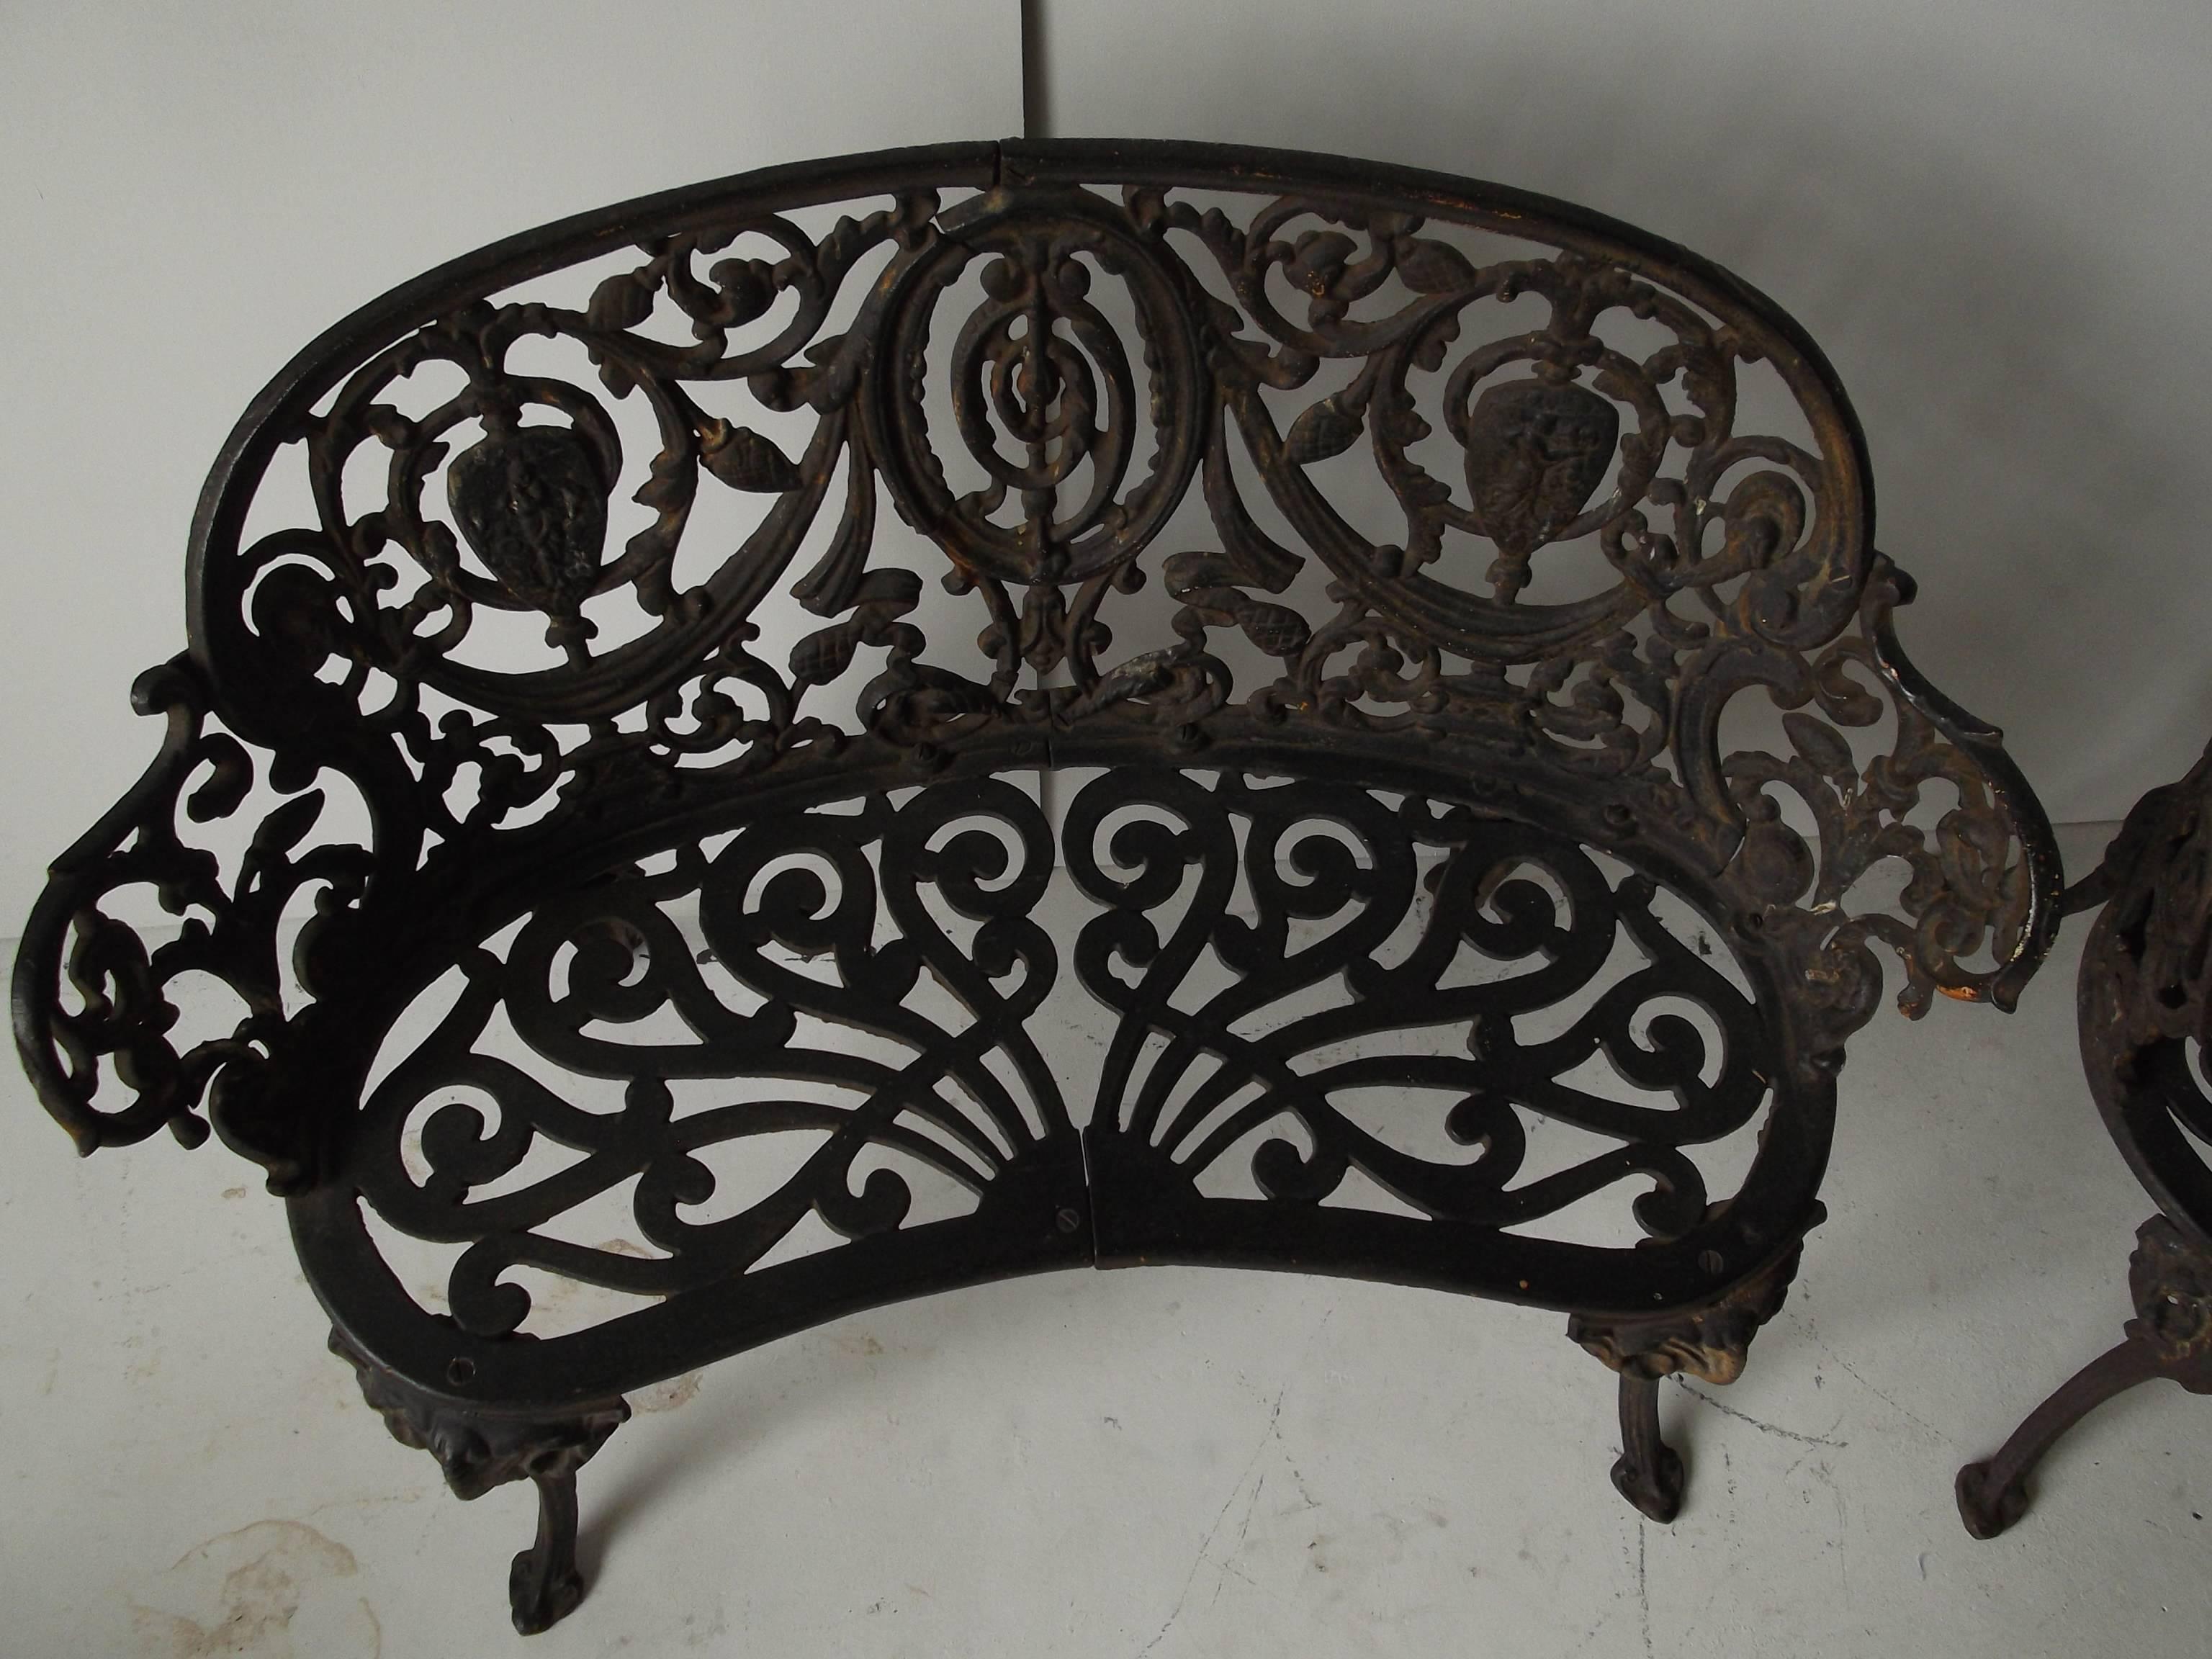 Pair of neoclassical style cast iron garden benches. Orig. garden patina. Feature figural plaques with ornate draping and foliage. Perfect romantic set for your garden or patio. They are a nice smaller size, with the dimensions of one being slightly